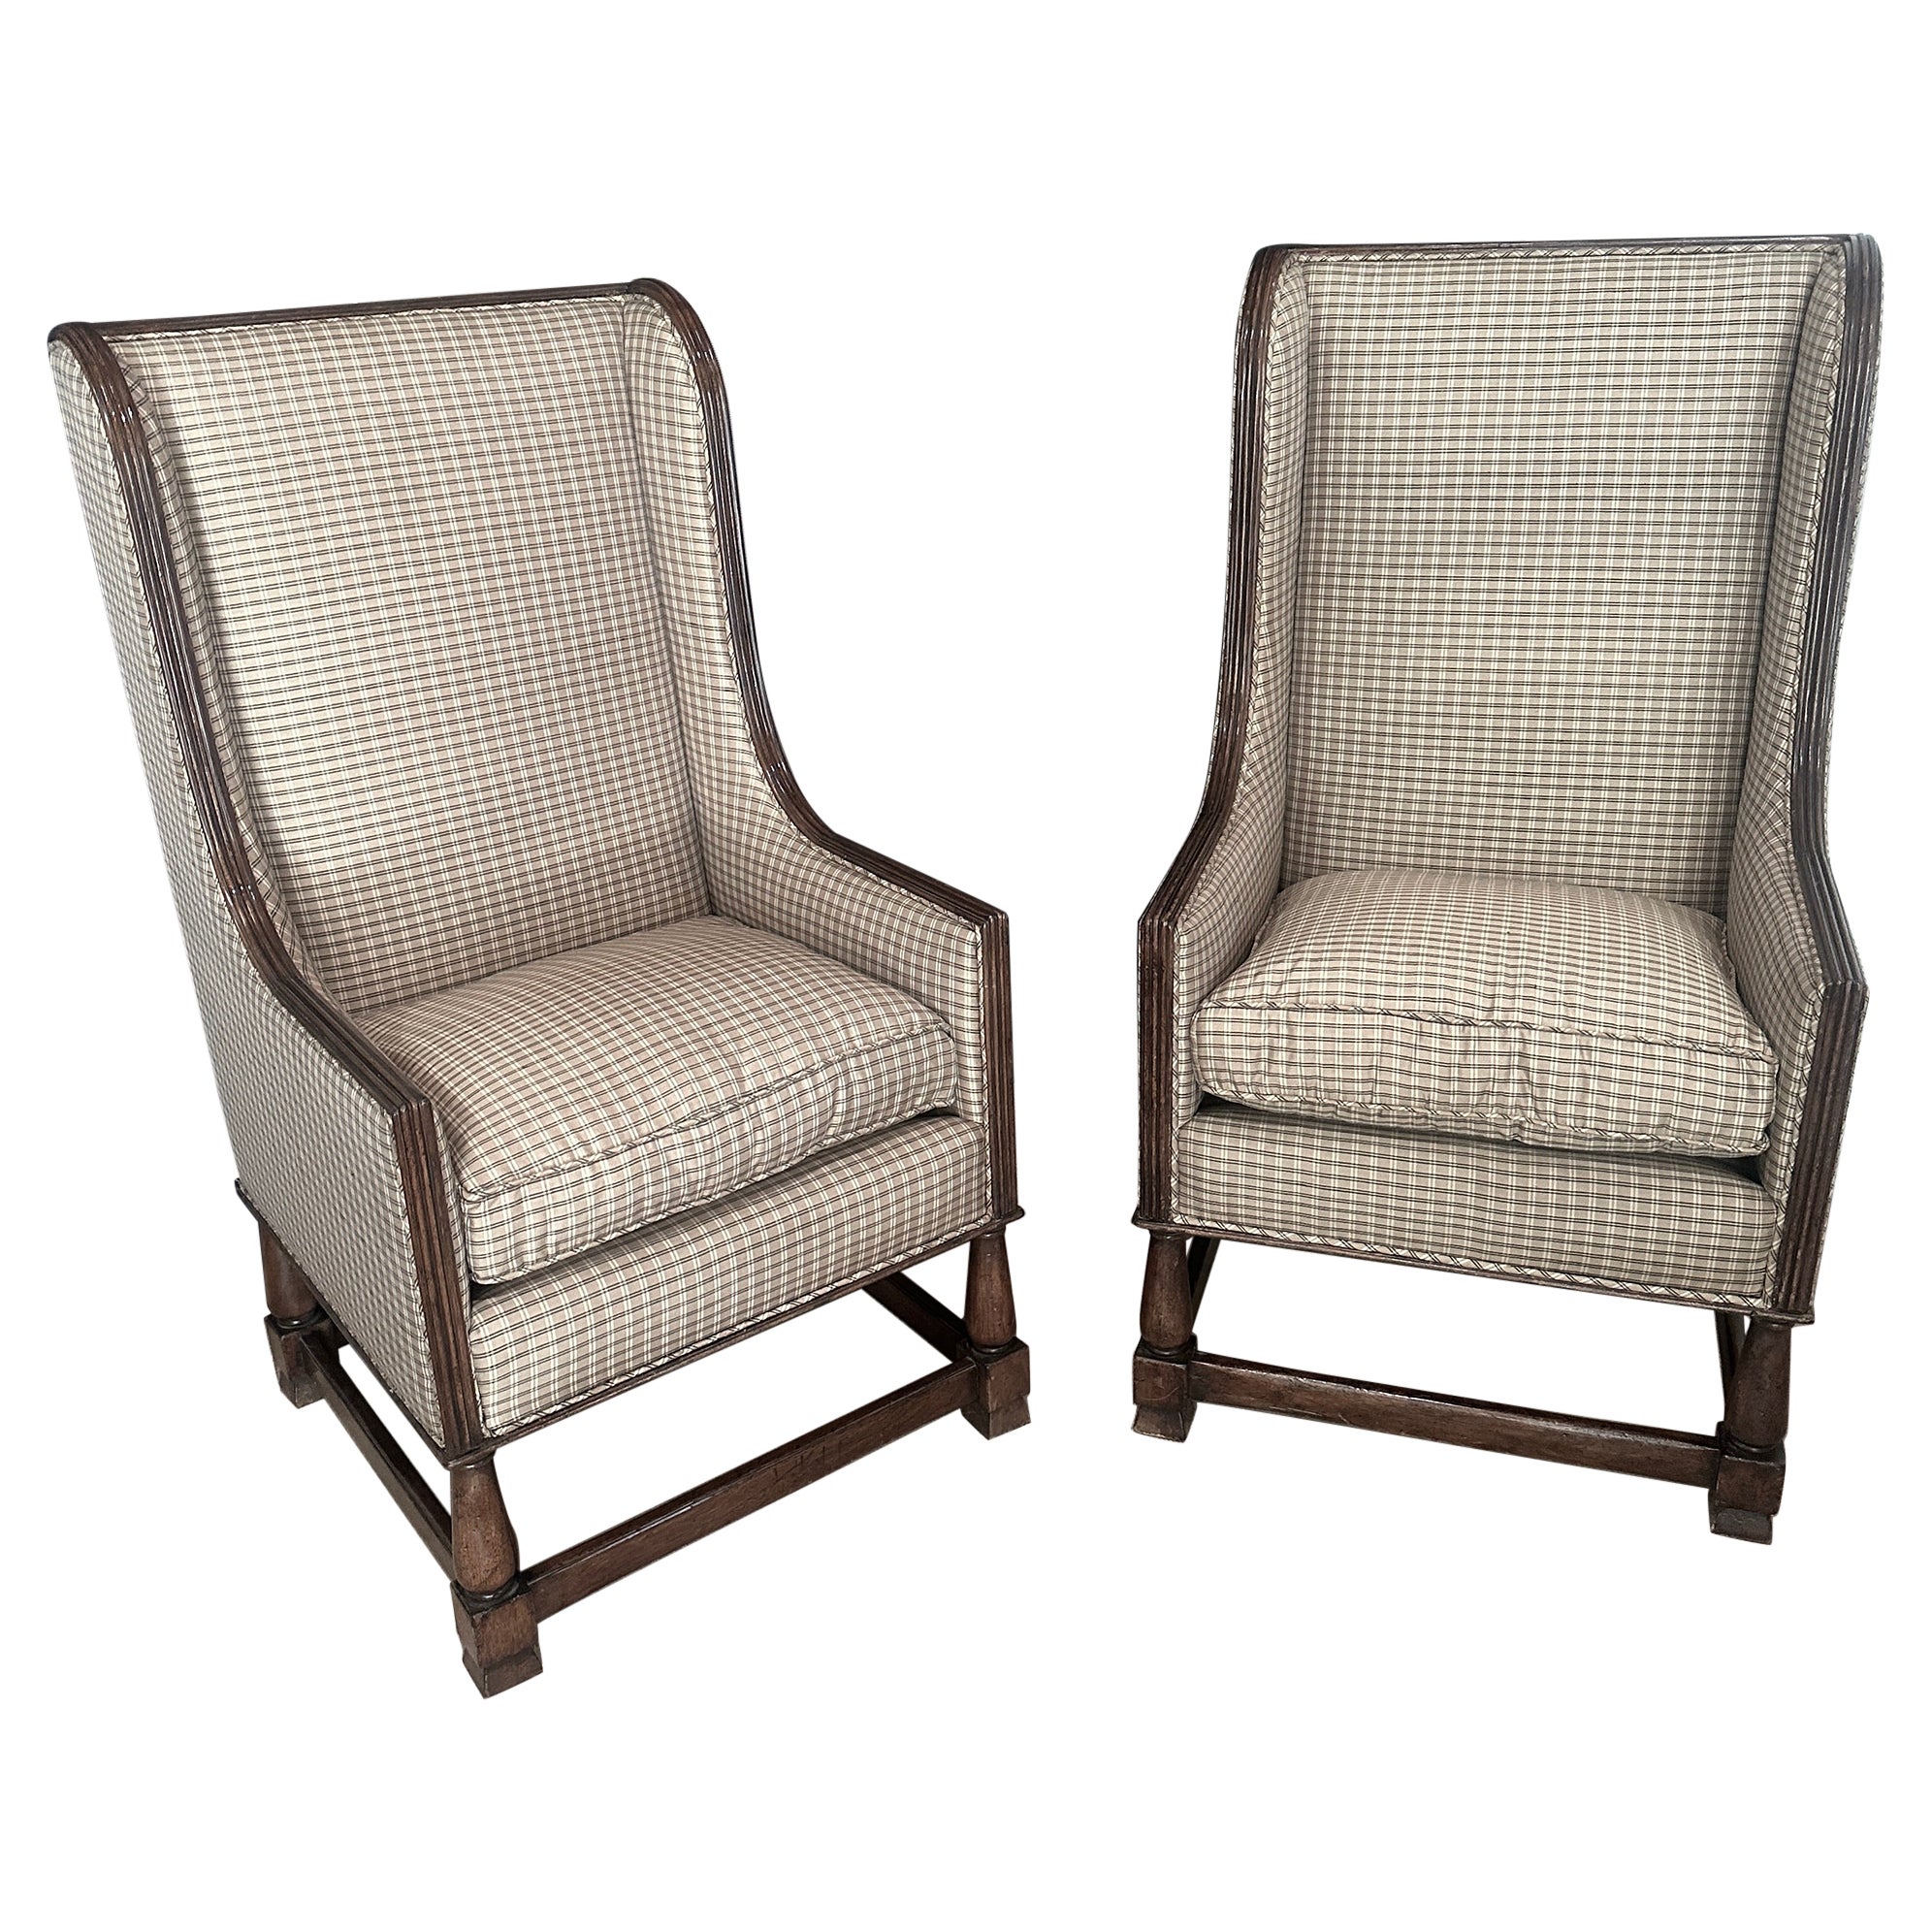  Italian Lounge Chairs in Walnut -a pair - newly upholstered in Silk Plaid